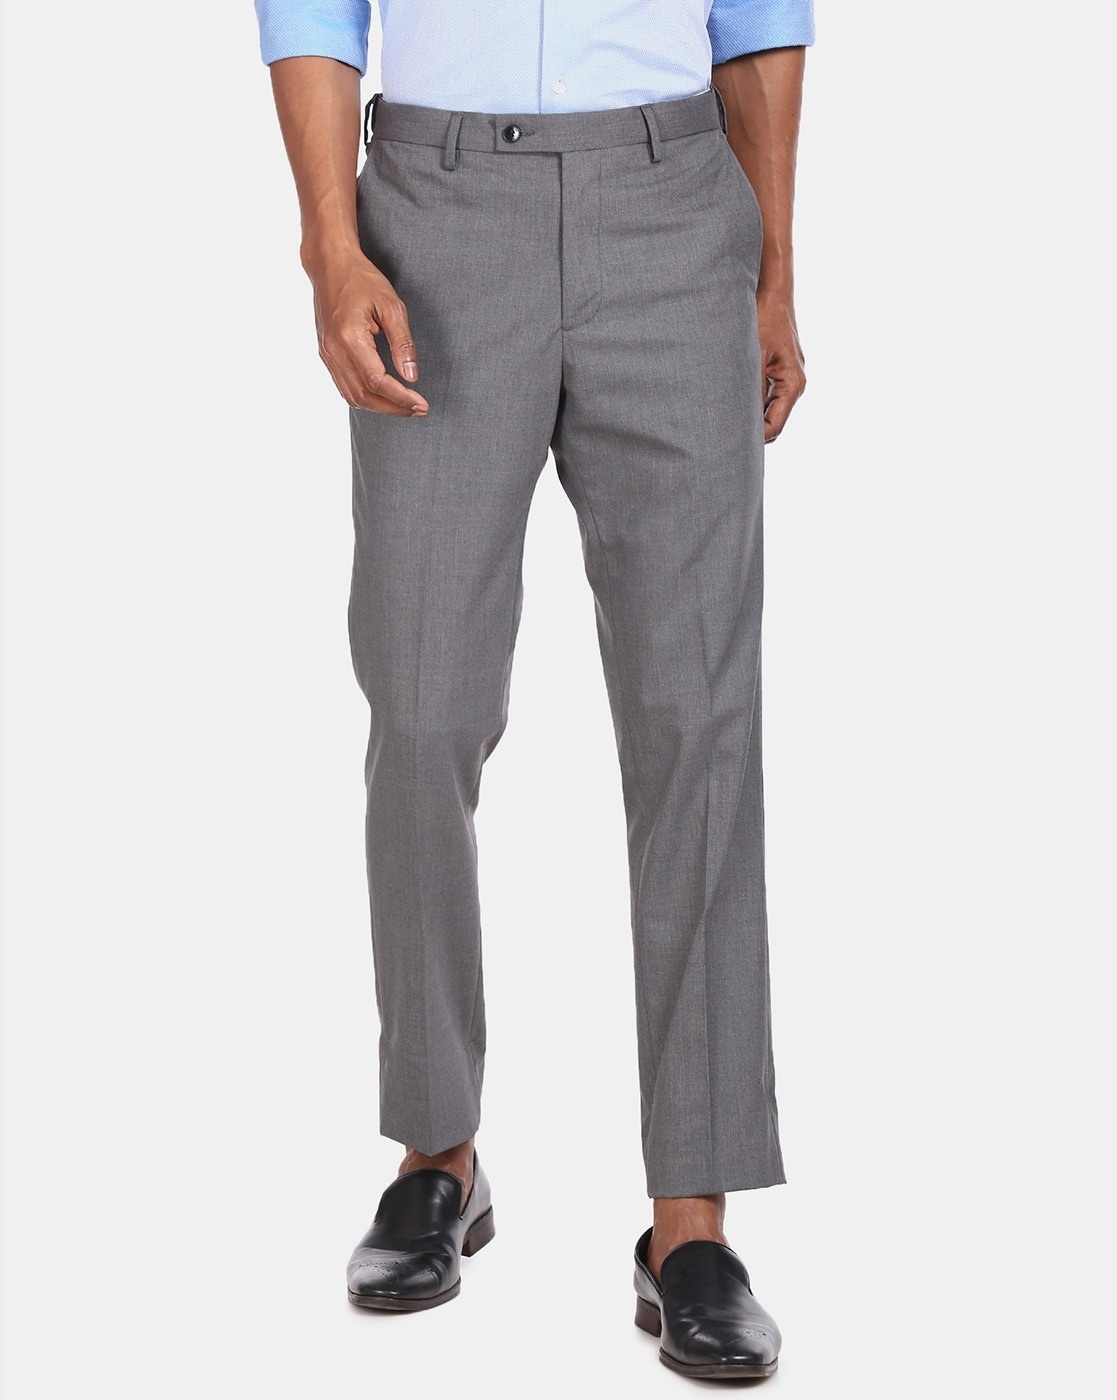 Buy GREY Trousers & Pants for Men by Haul Chic Online | Ajio.com